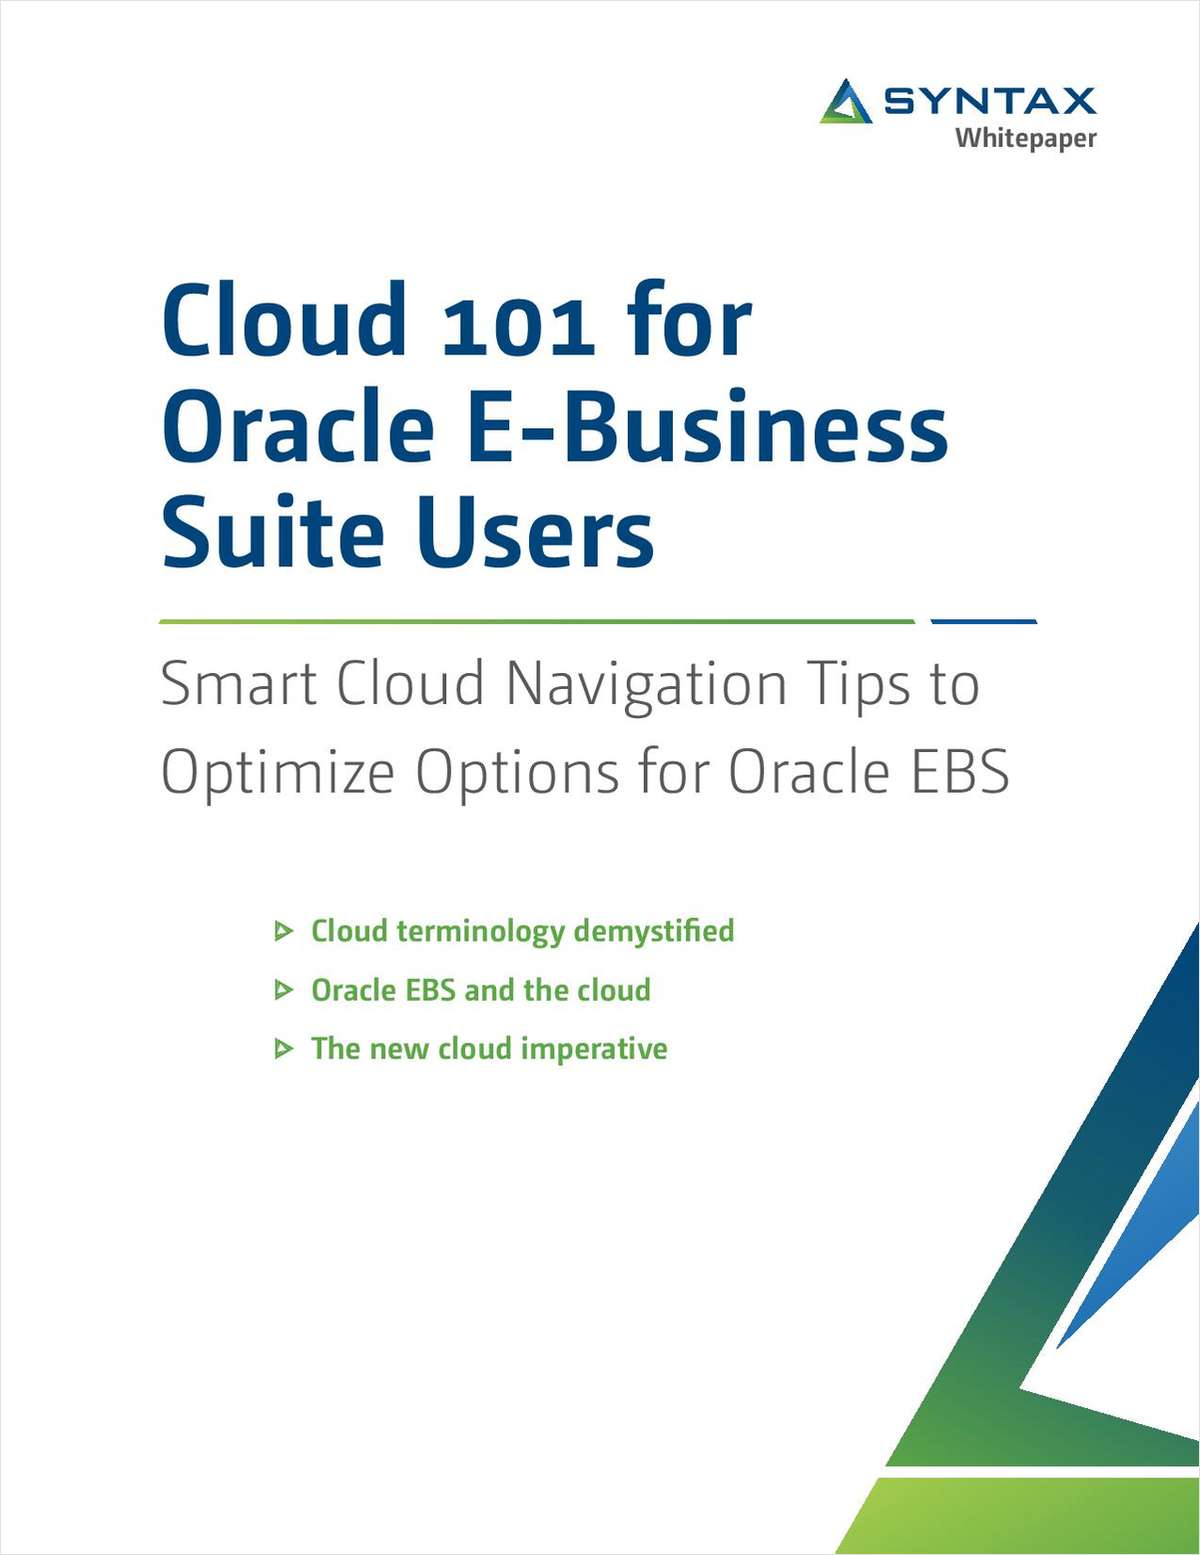 Cloud 101 for Oracle E-Business Suite Users